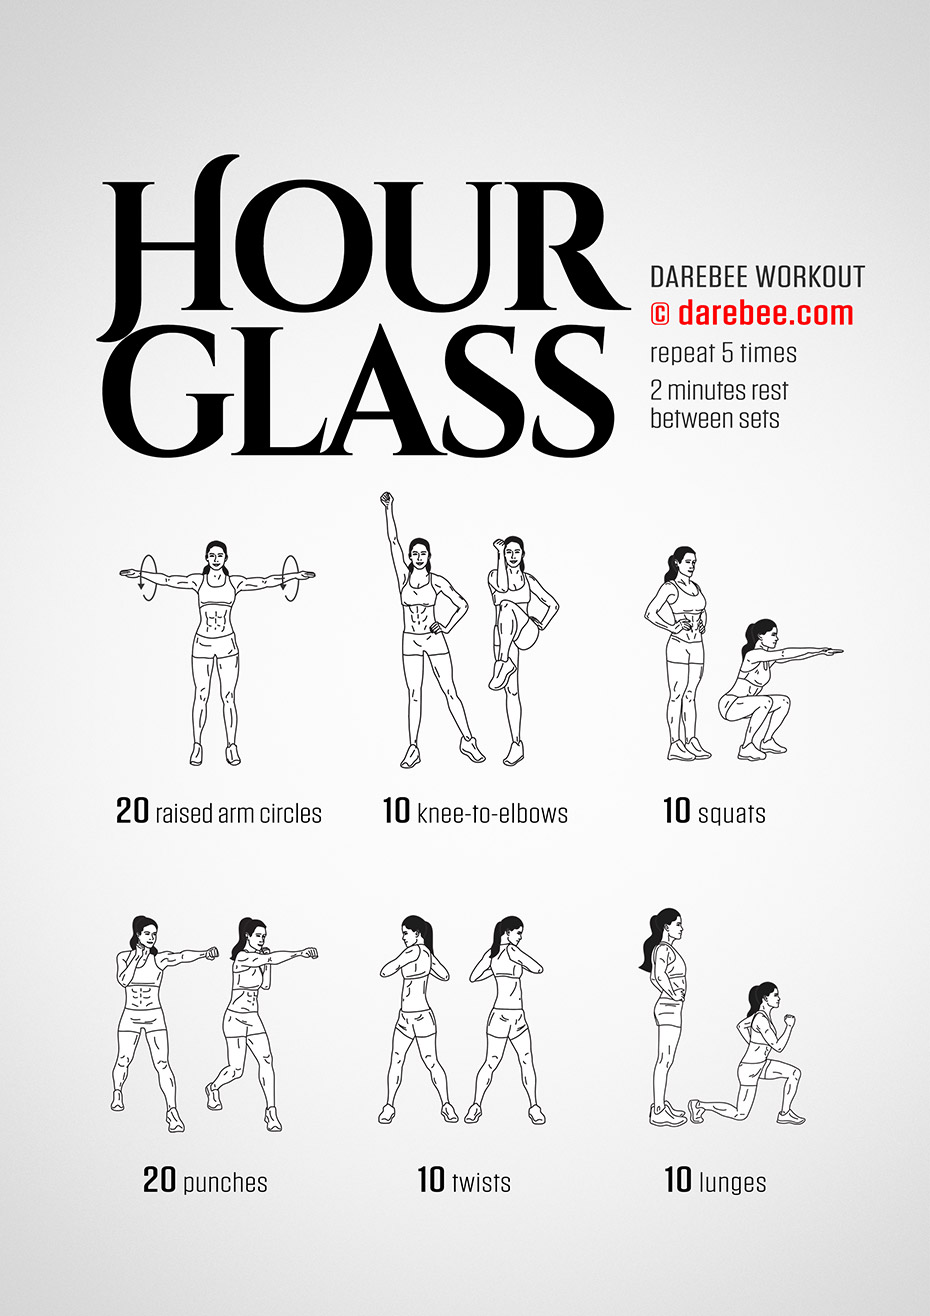 hourglass workout routine